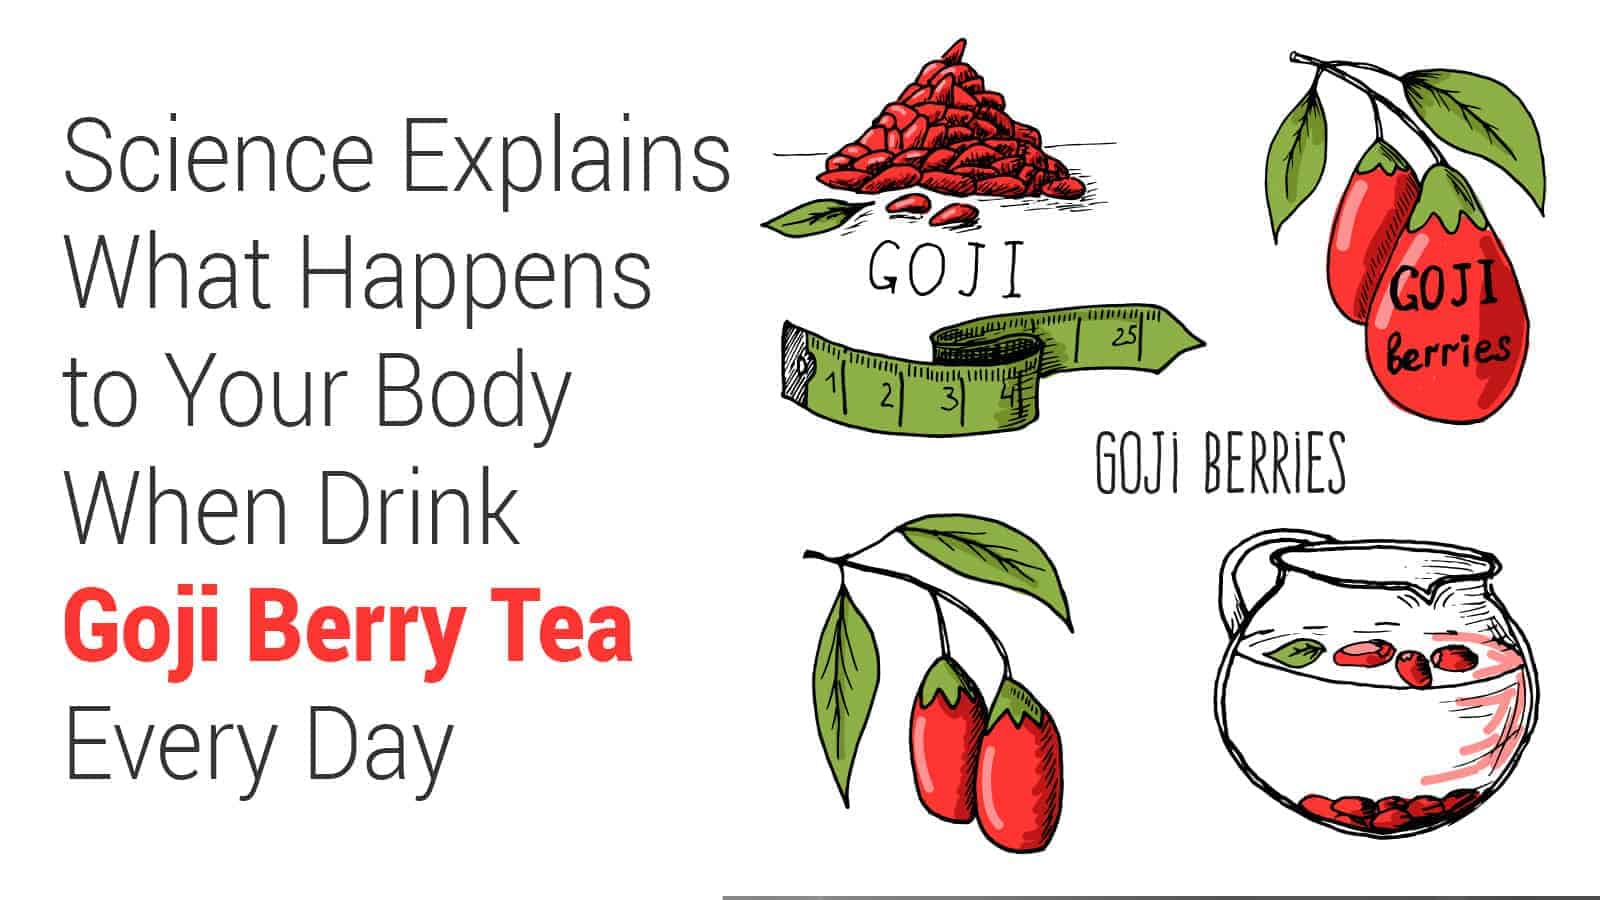 Science Explains What Happens to Your Body When You Drink Goji Berry Tea Every Day